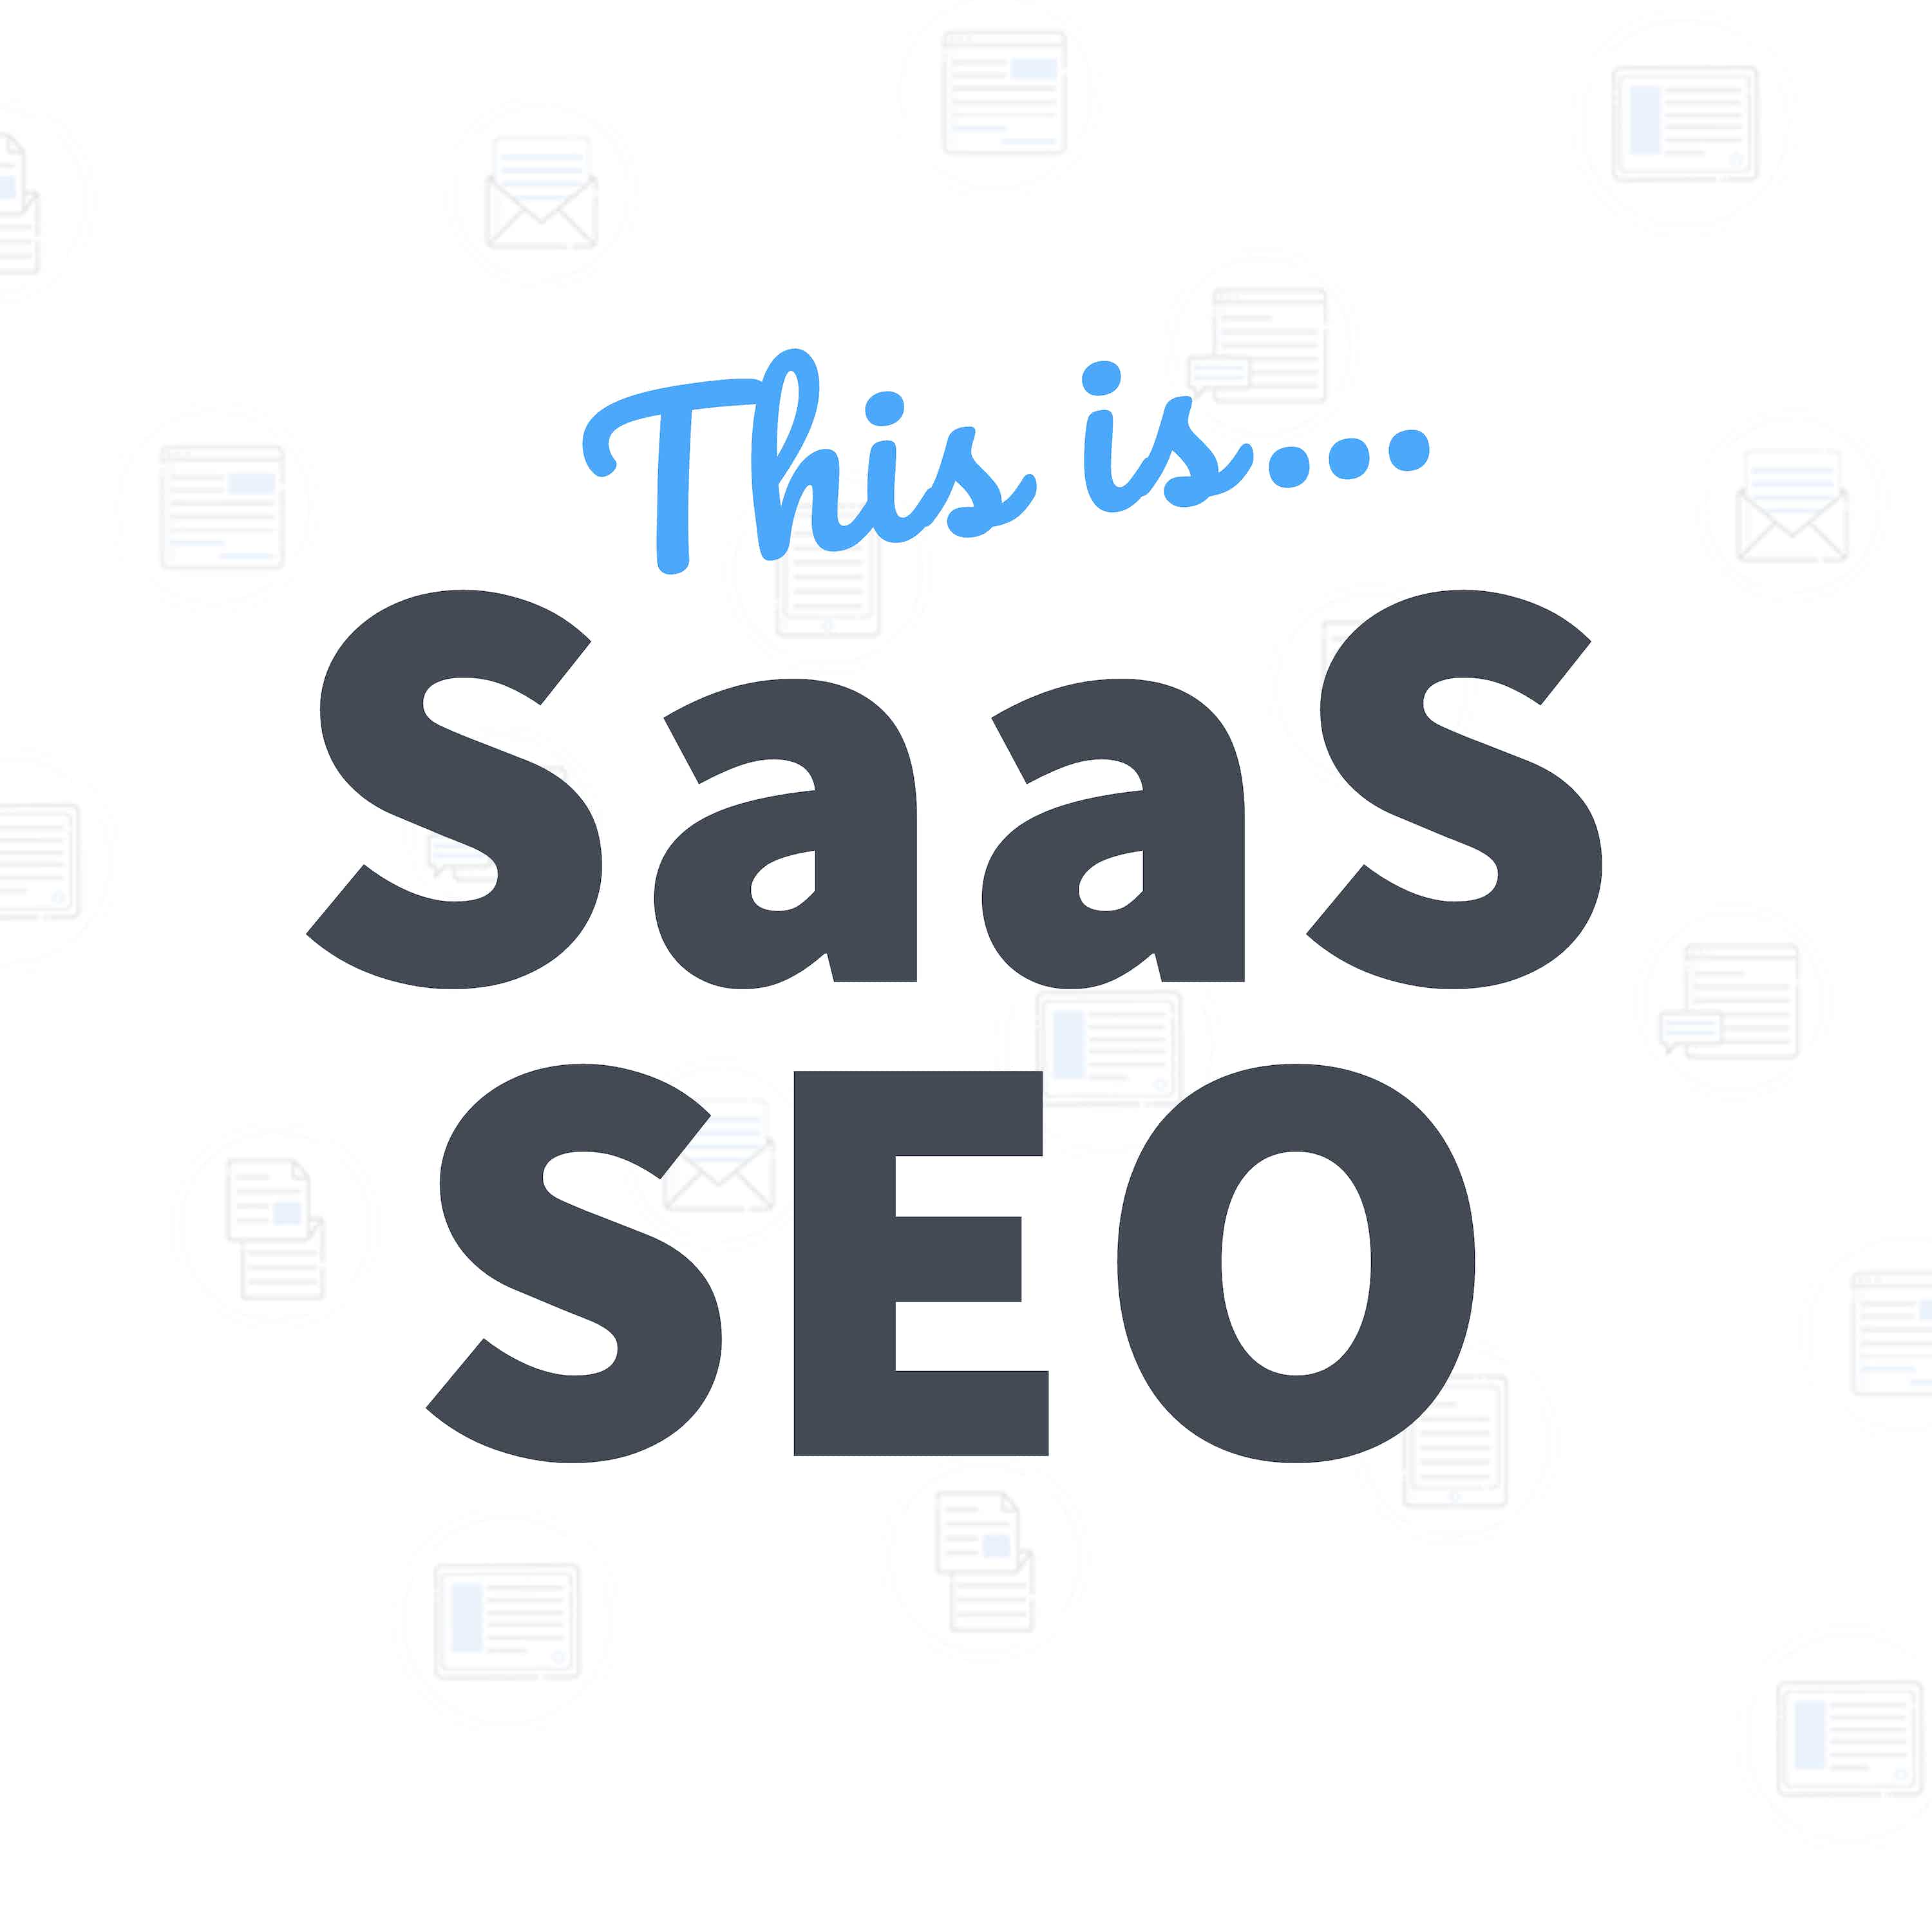 How to Analyze and Pick the Right Keywords for Your SaaS